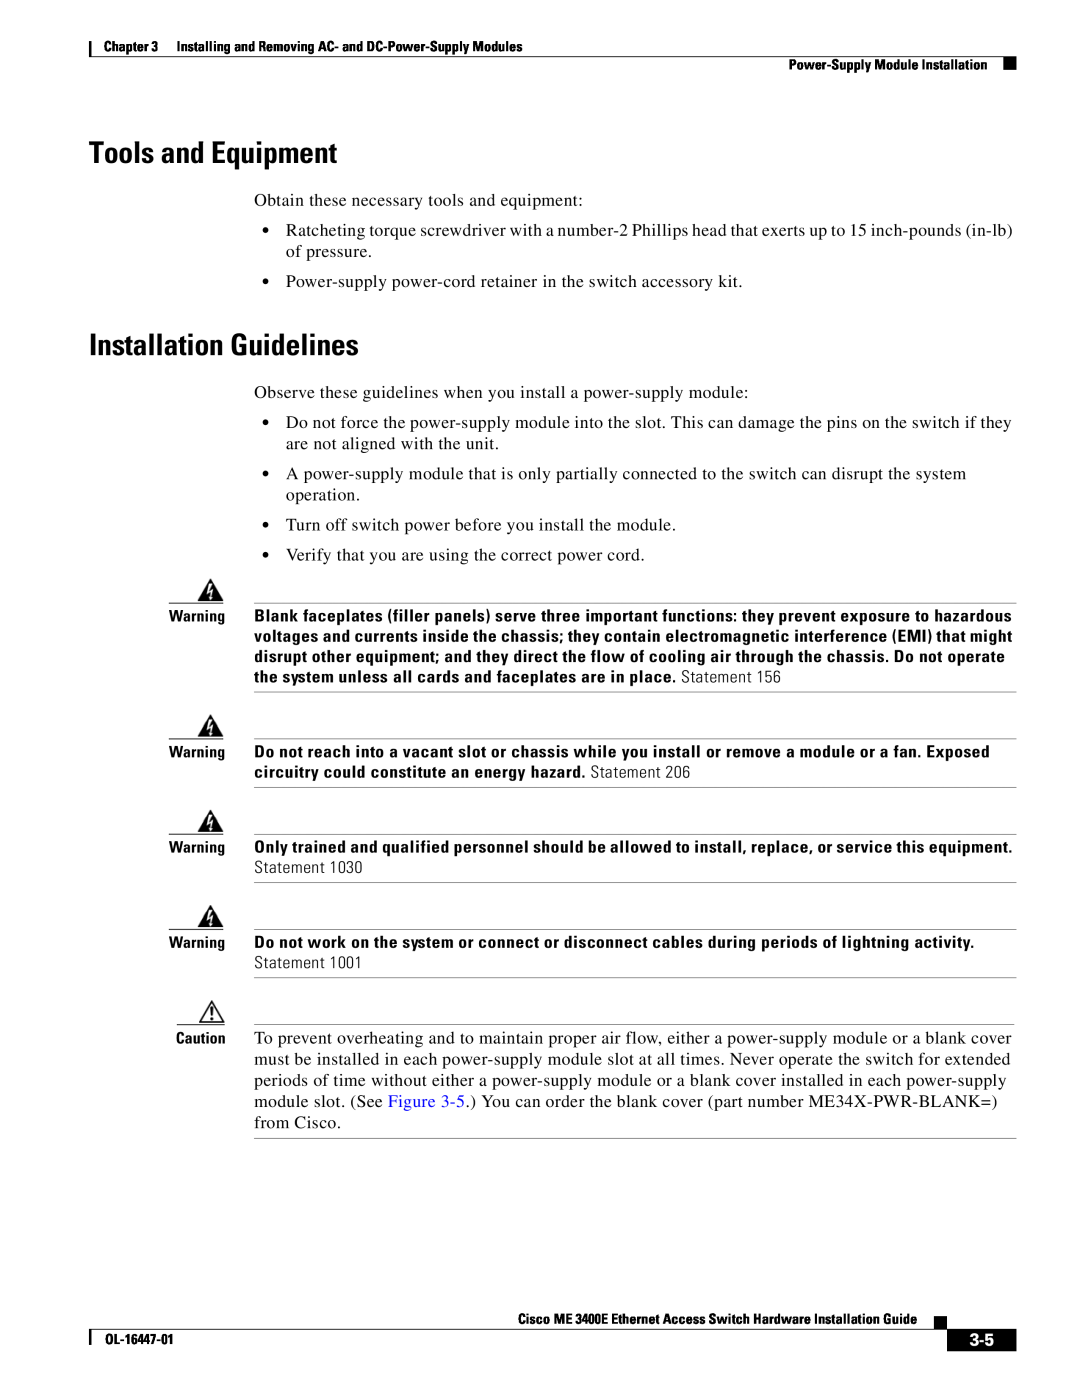 Cisco Systems OL-16447-01 manual Tools and Equipment, Installation Guidelines 